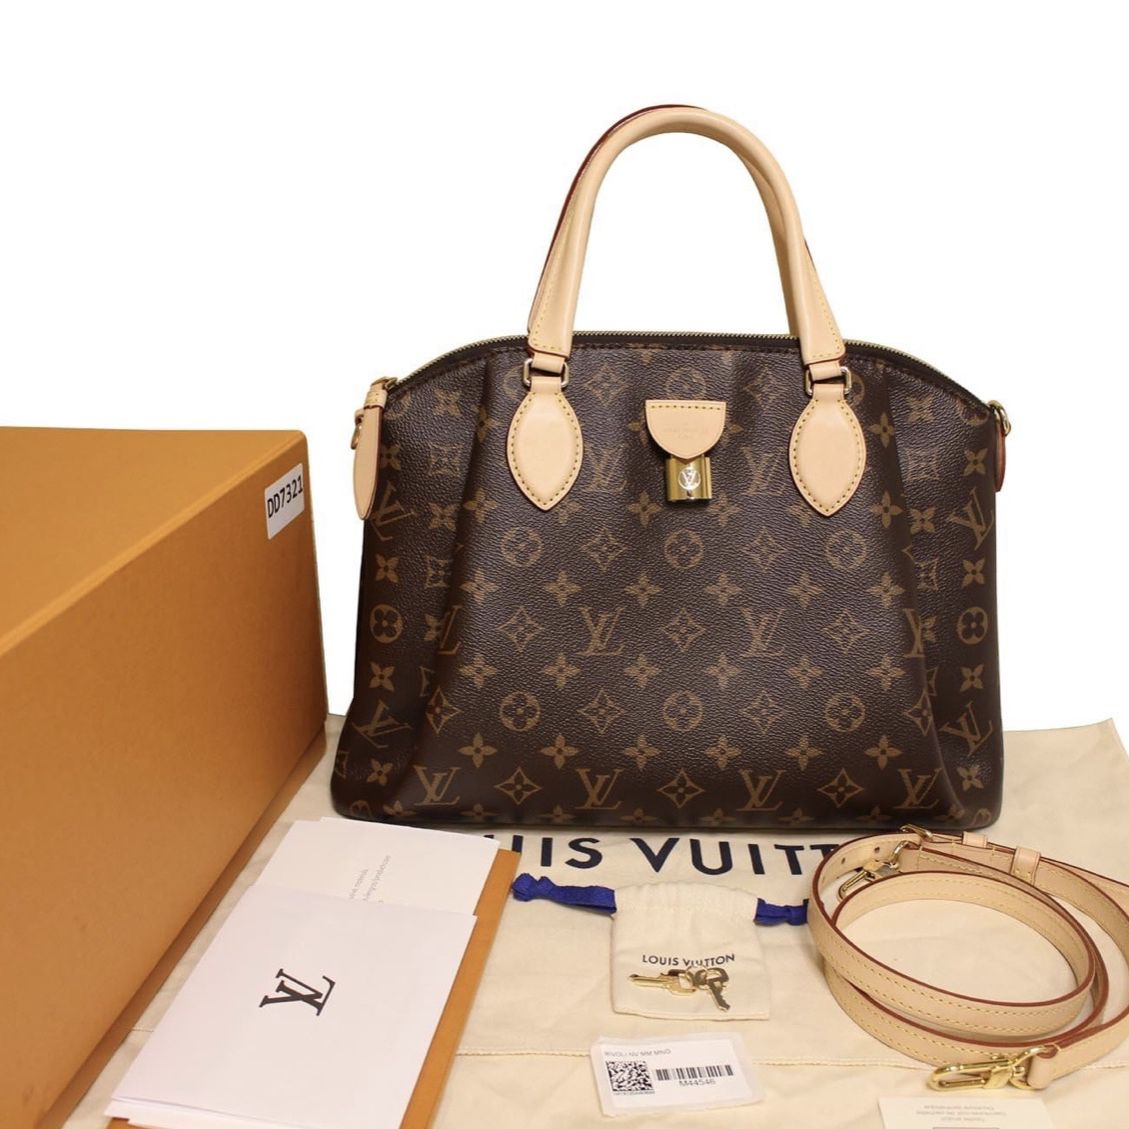 Louis Vuitton Dust Bag for Sale in Rancho Cucamonga, CA - OfferUp